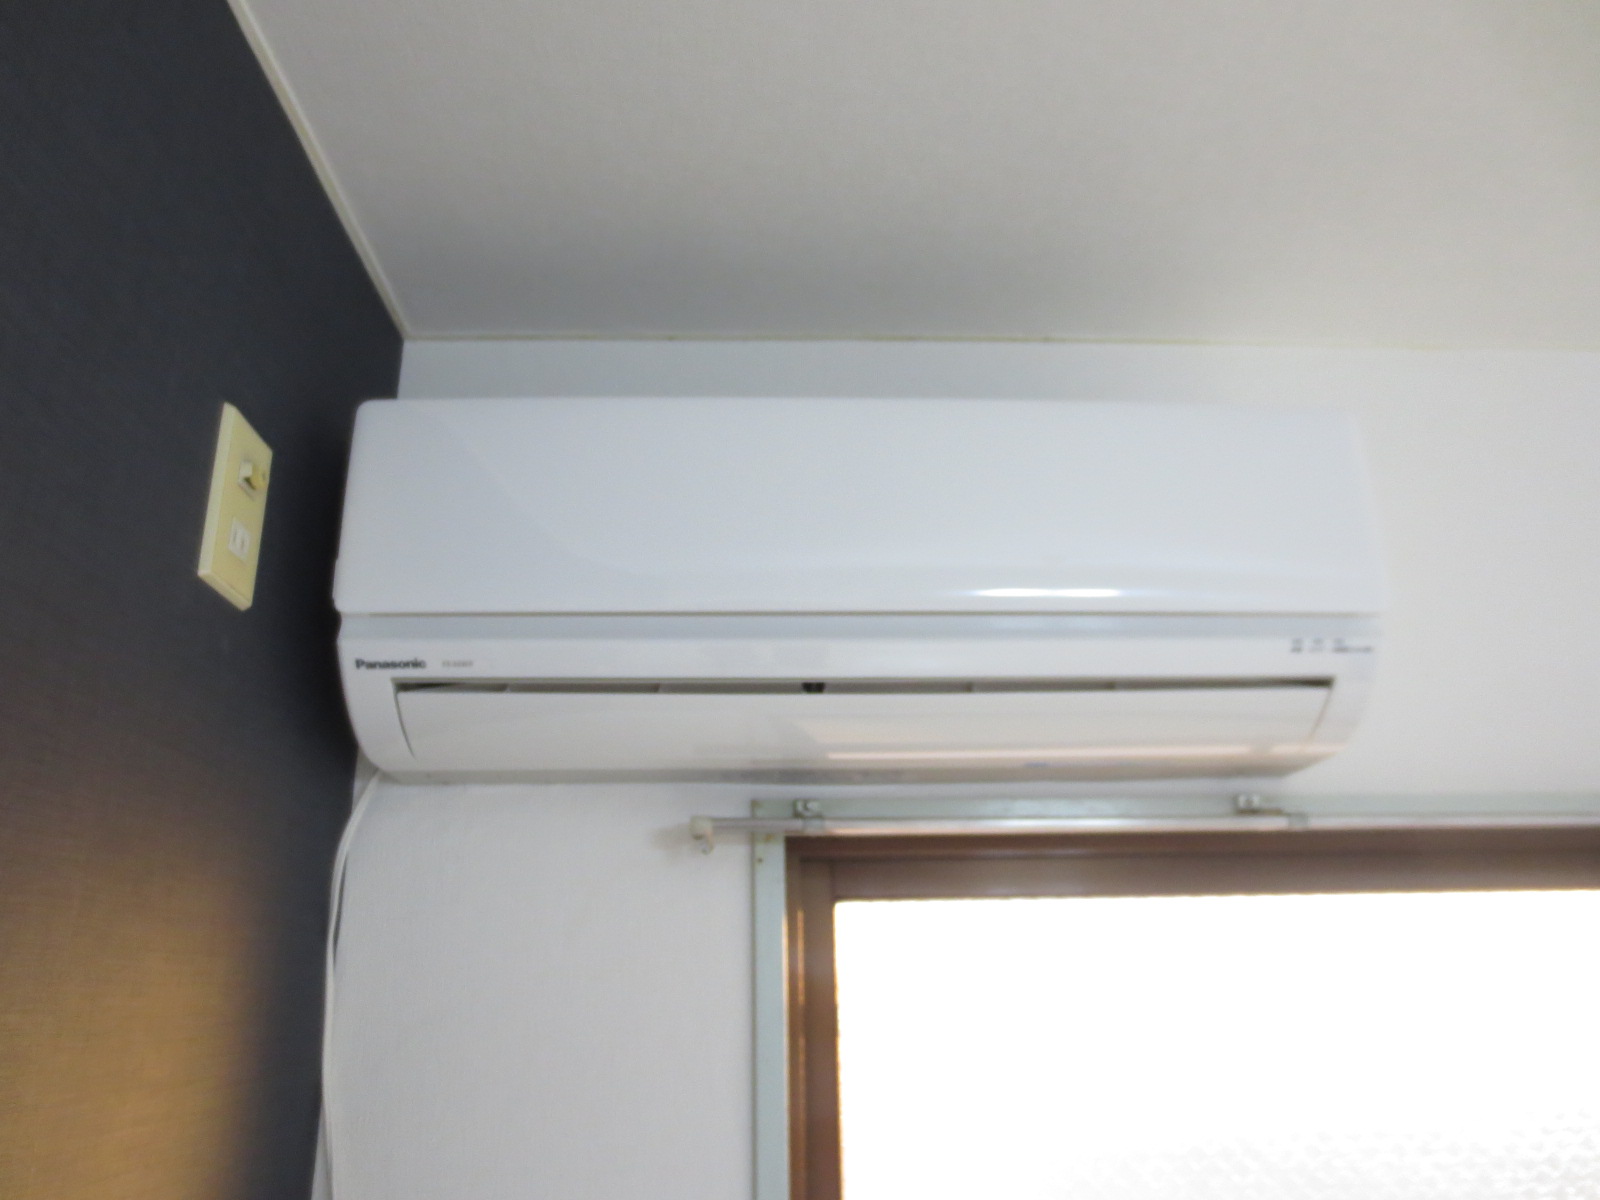 Other Equipment. Air conditioning is a new article